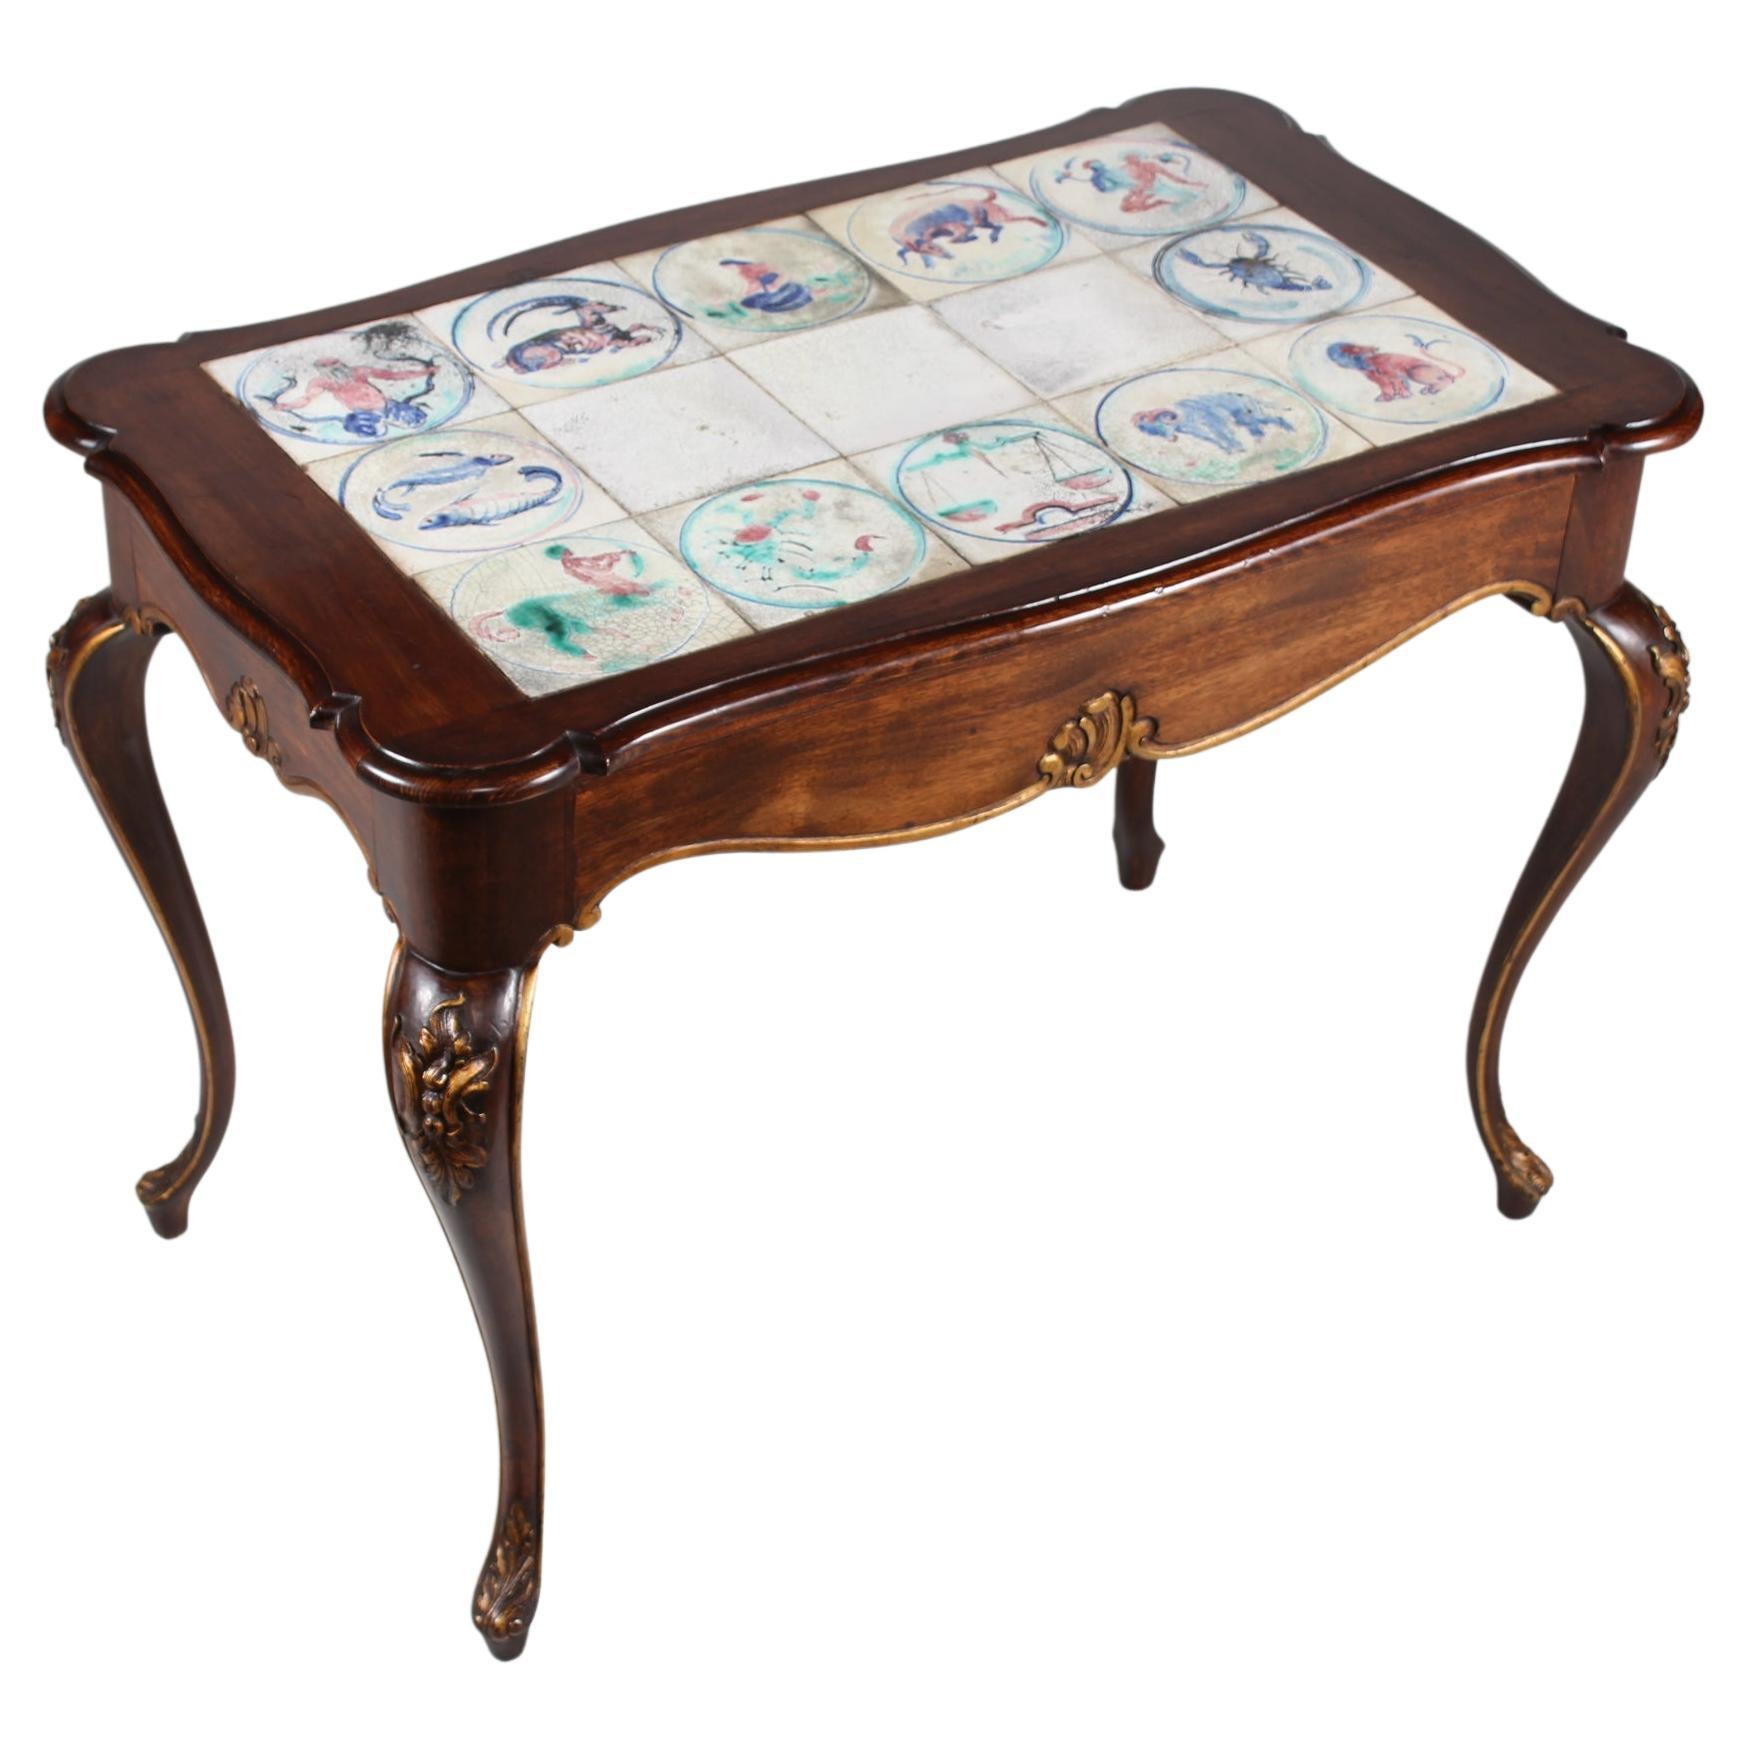 Danish Rococo-style table made of mahogany with curved legs and gilded carvings of stylized foliage. 

The tiles are decorated by Jens Thirslund (1892-1942) with the 12 zodiac signs, 1 for each month.
Jens Thirslund was for years a talented and much